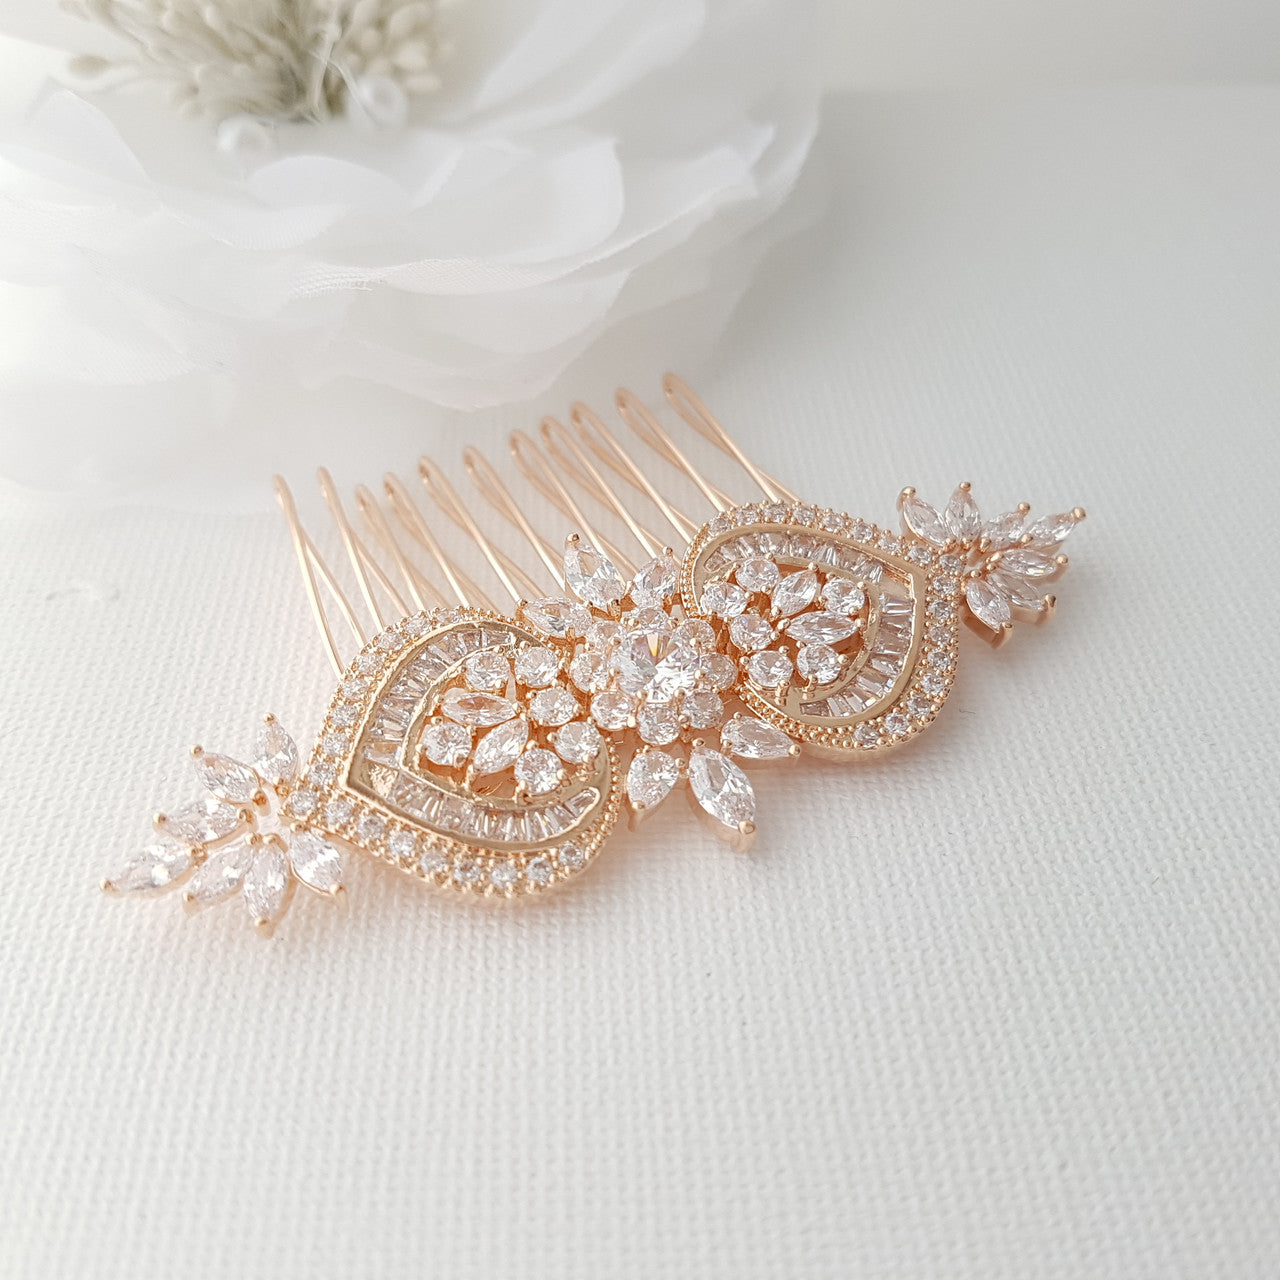 Rose Gold Bridal Hair Comb, Wedding Hair Comb, Pearl Bridal Hair Piece, Crystal, Gold, Pearls, Bride Hair Jewelry, Rosa